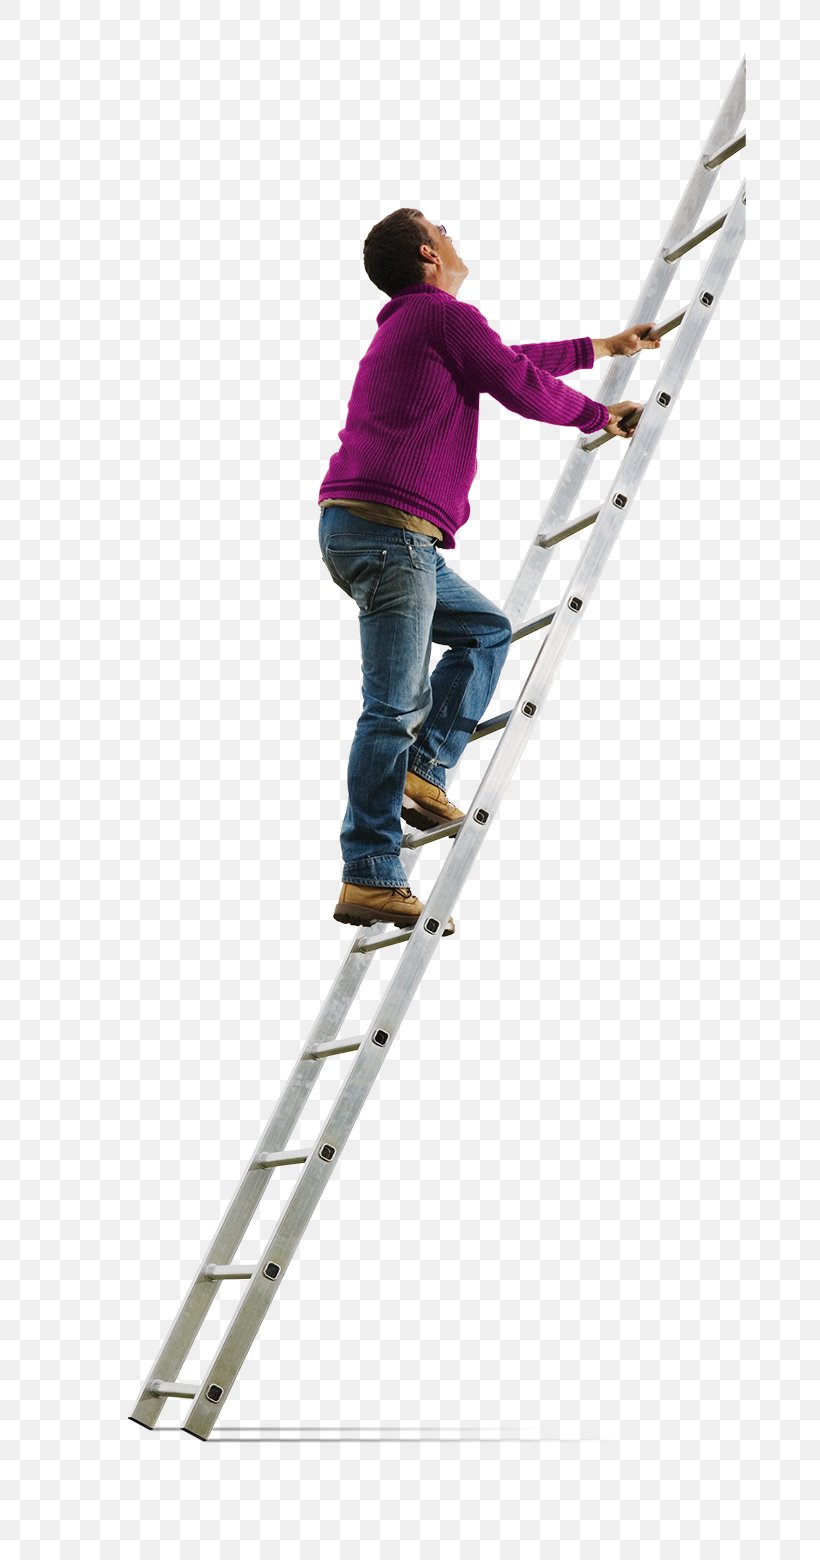 Ladder Štafle Stock Photography Keukentrap Getty Images, PNG, 672x1560px, Ladder, Climbing, Getty Images, Image Resolution, Keukentrap Download Free